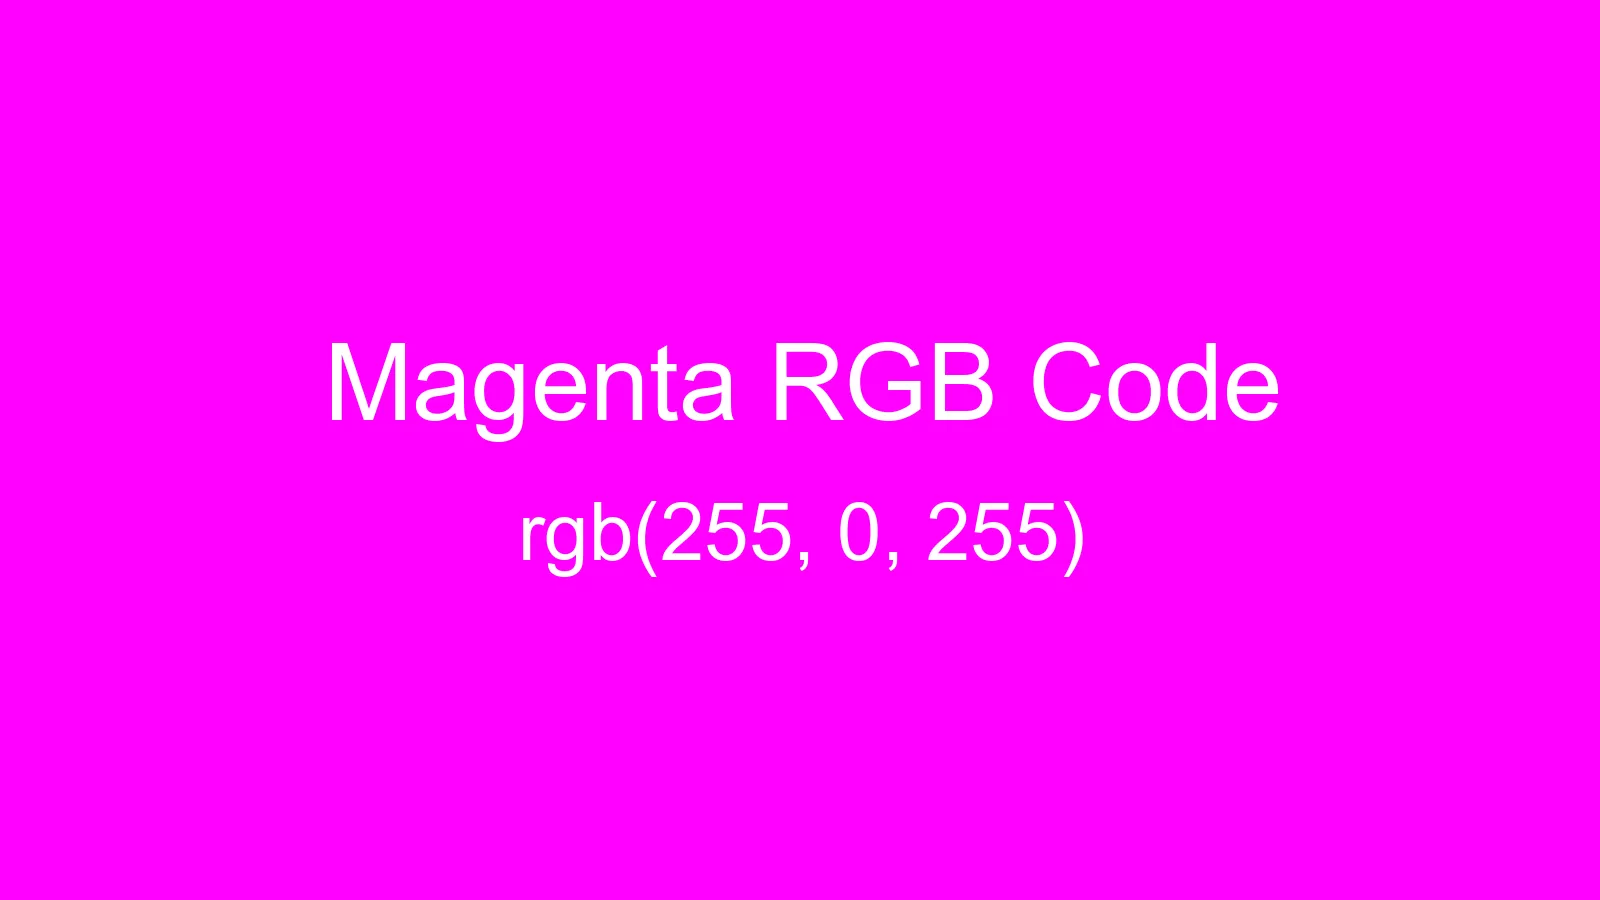 preview image of Magenta color and RGB code